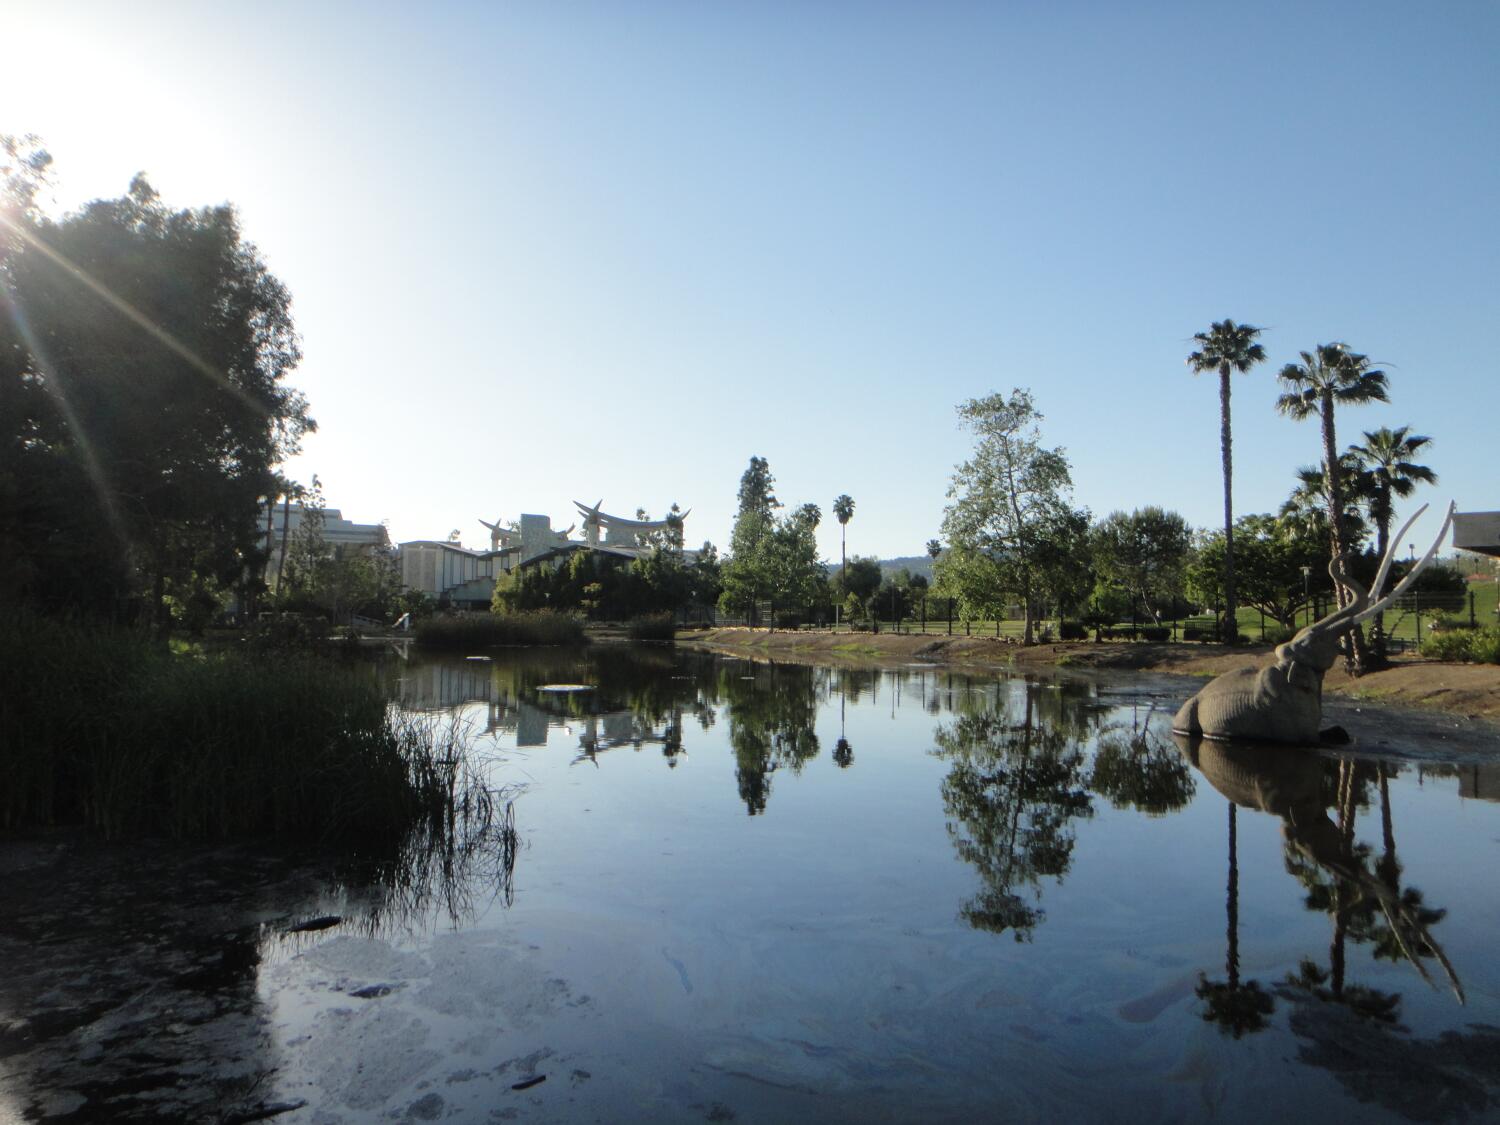 8 teens on La Brea Tar Pits trip hospitalized after ingesting 'cannabis edibles,' LAFD says